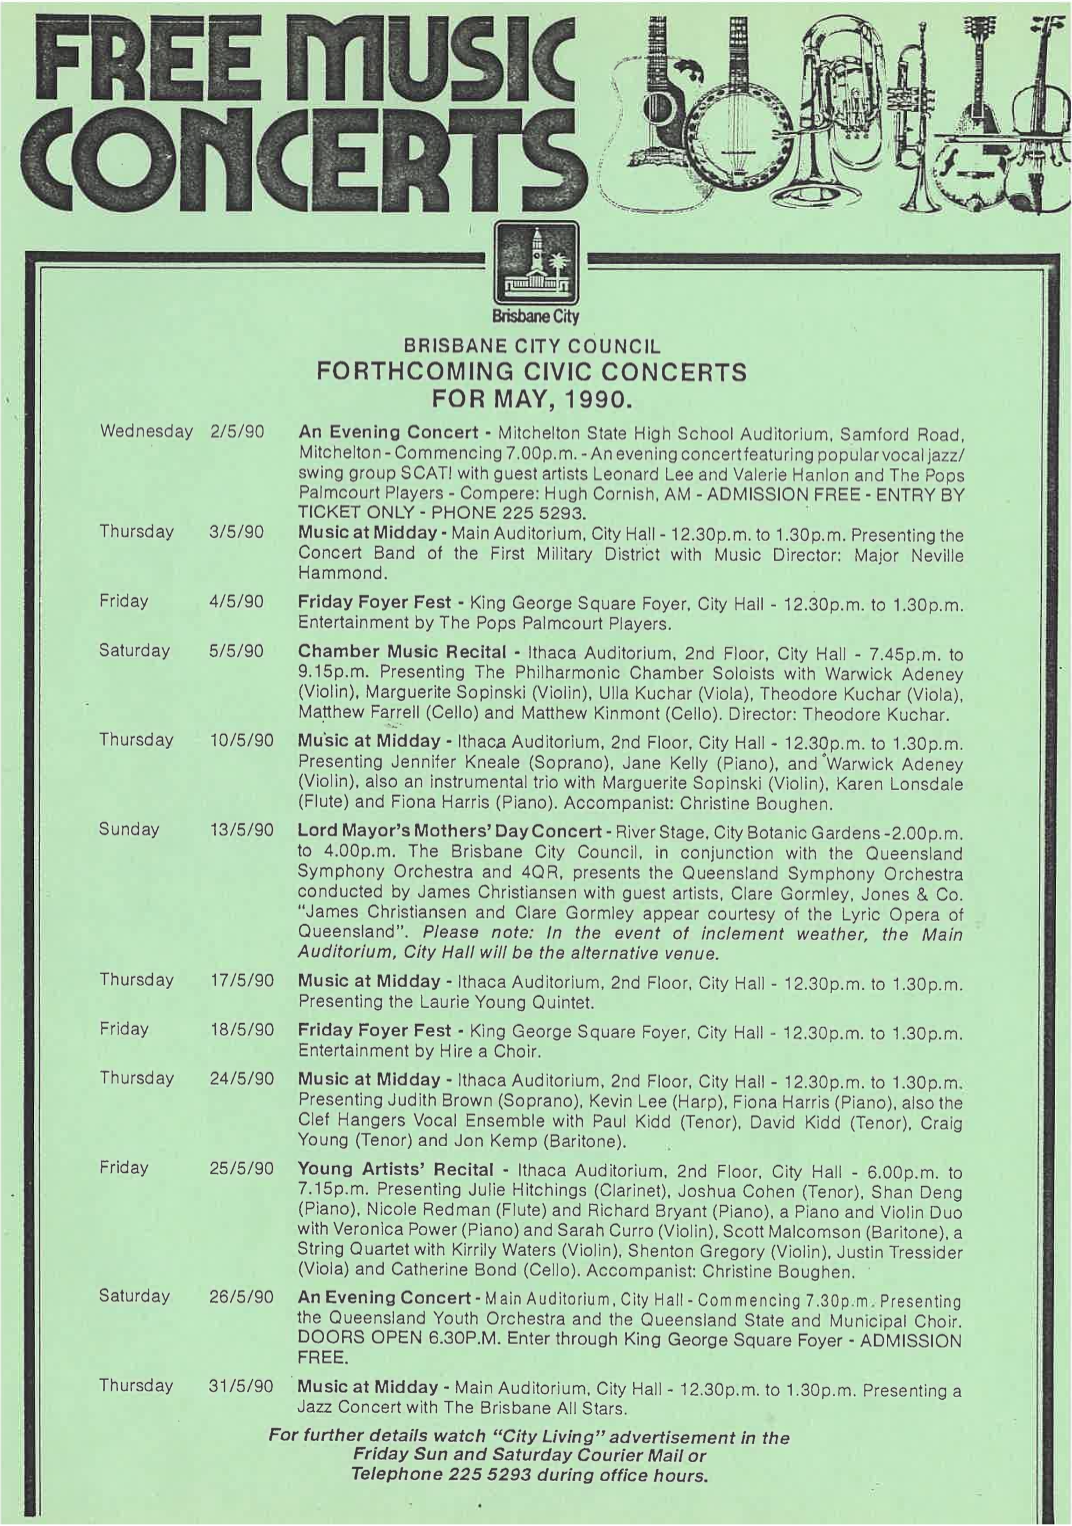 Brisbane City Council Forthcoming Civic Concerts for May, 1990. BCA1967. Brisbane City Archives. Brisbane City Council. Reproduced with permission.